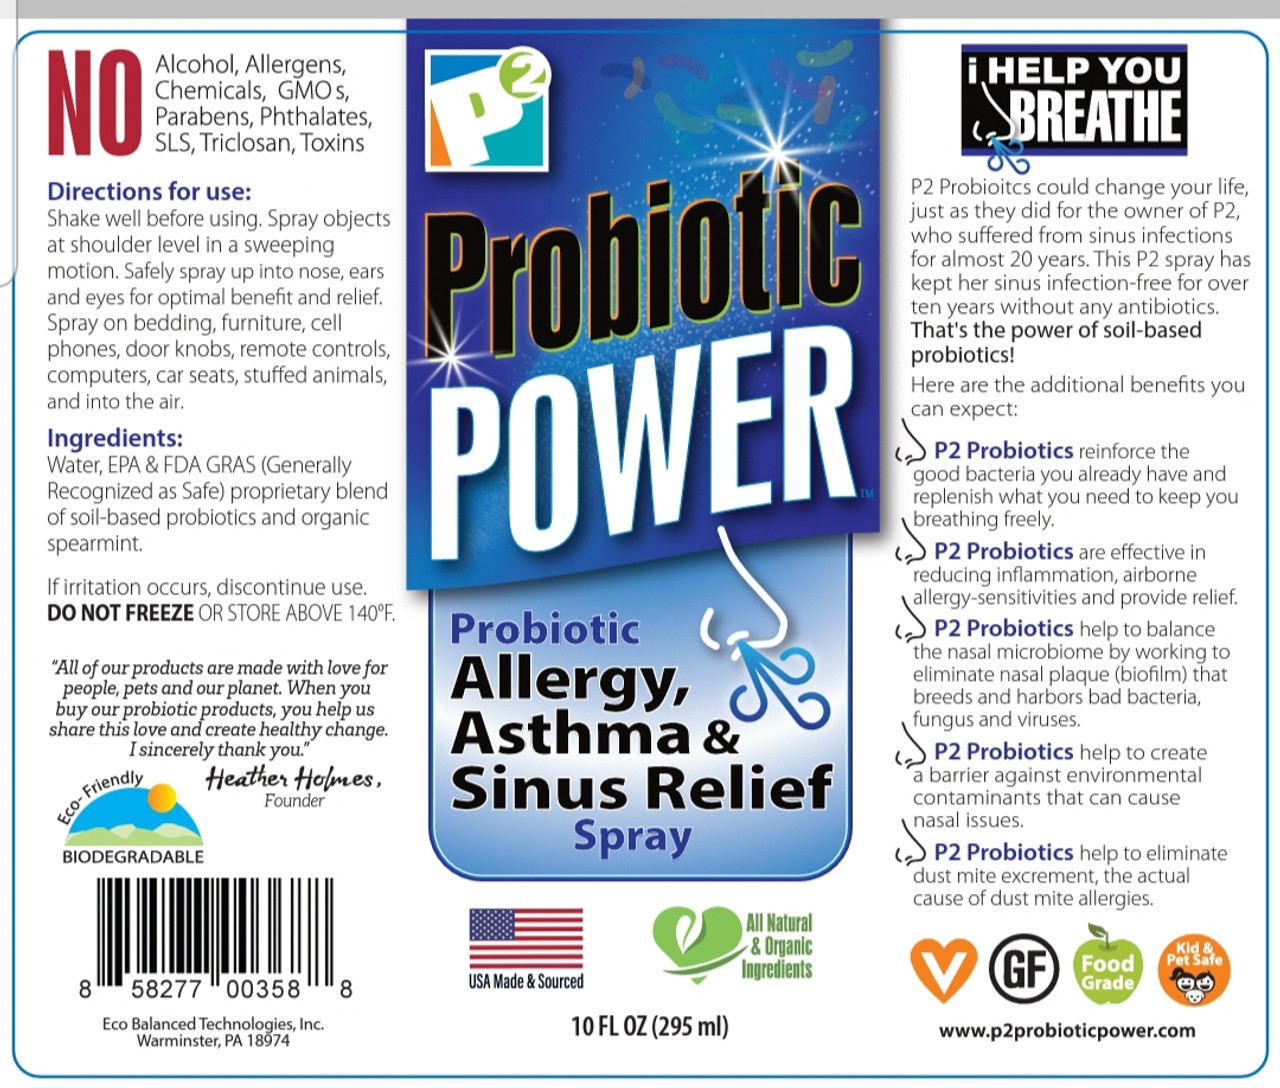 Probiotic Home Cleaning Kit for the overall health of your family